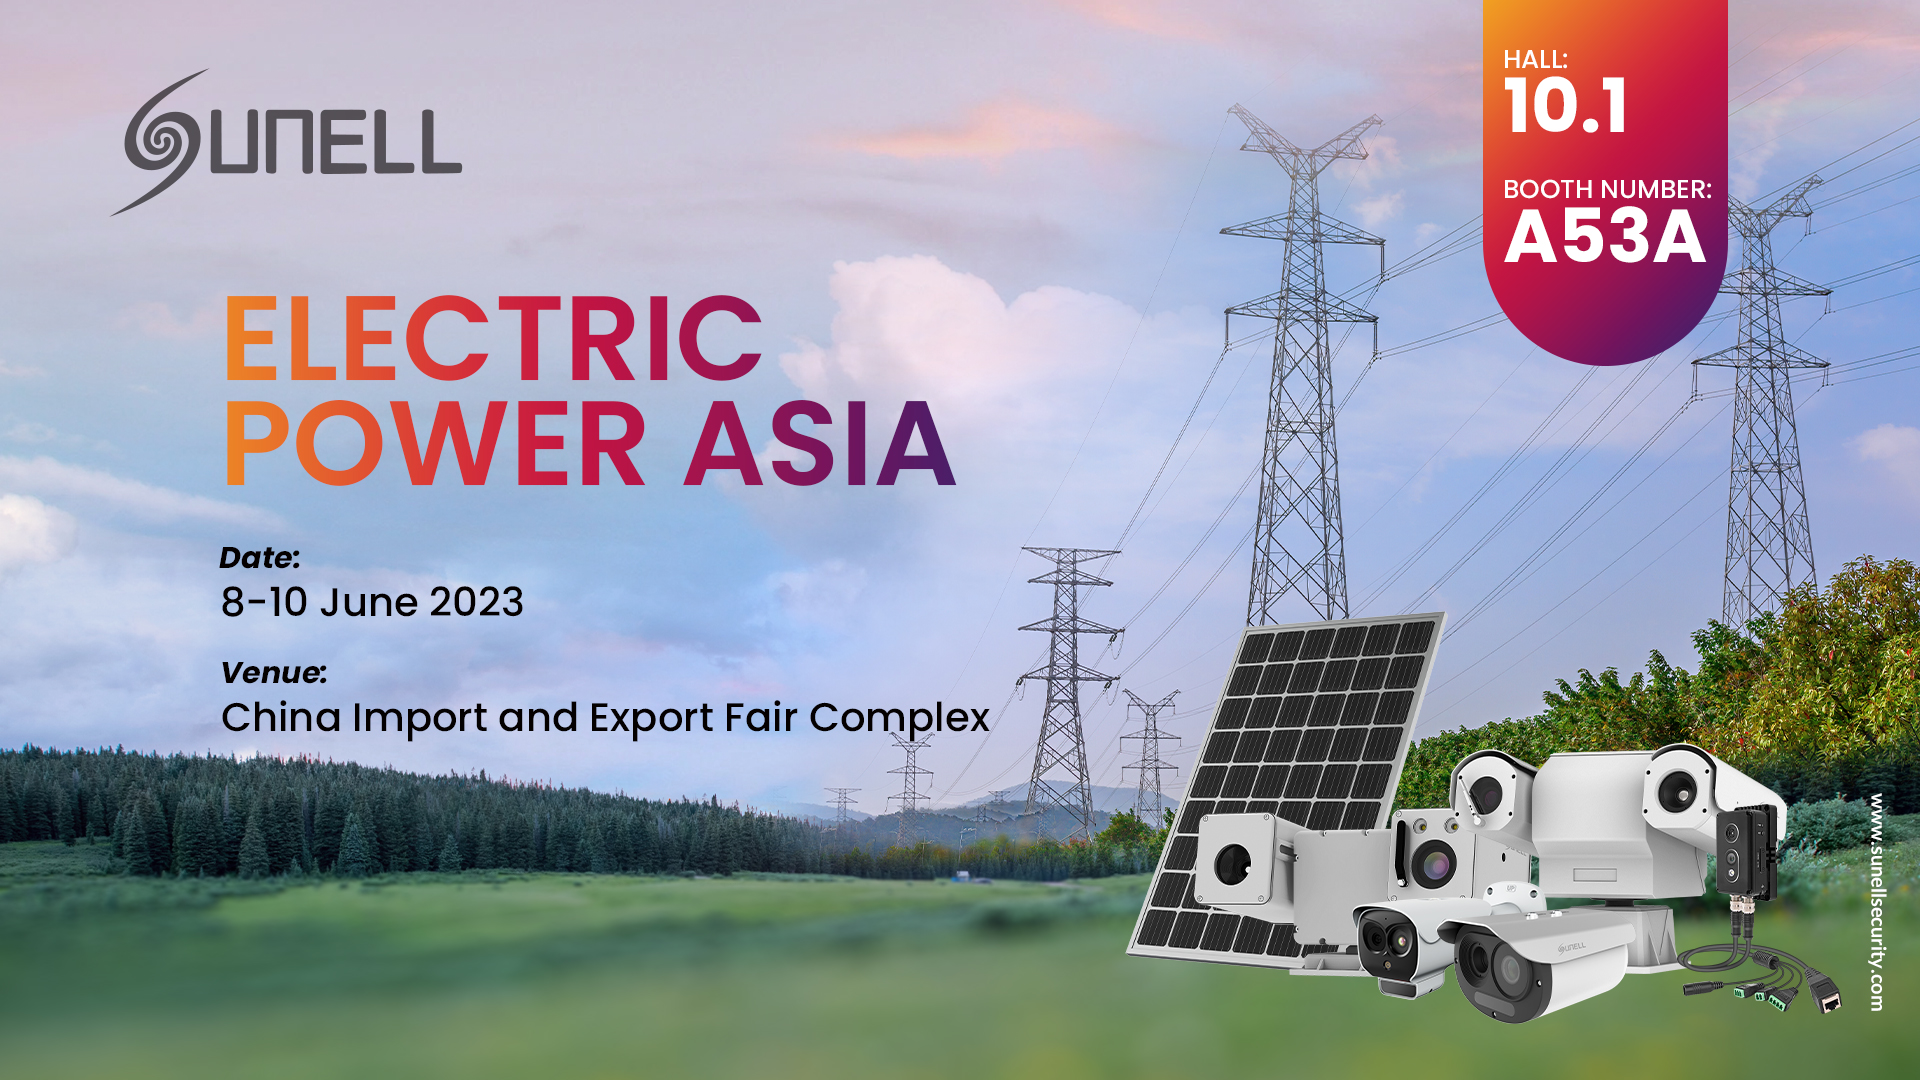 Sunell_will_showcase_thermal_imaging_intelligent_solutions_at_the_Electrical_Power_ASIA.jpg